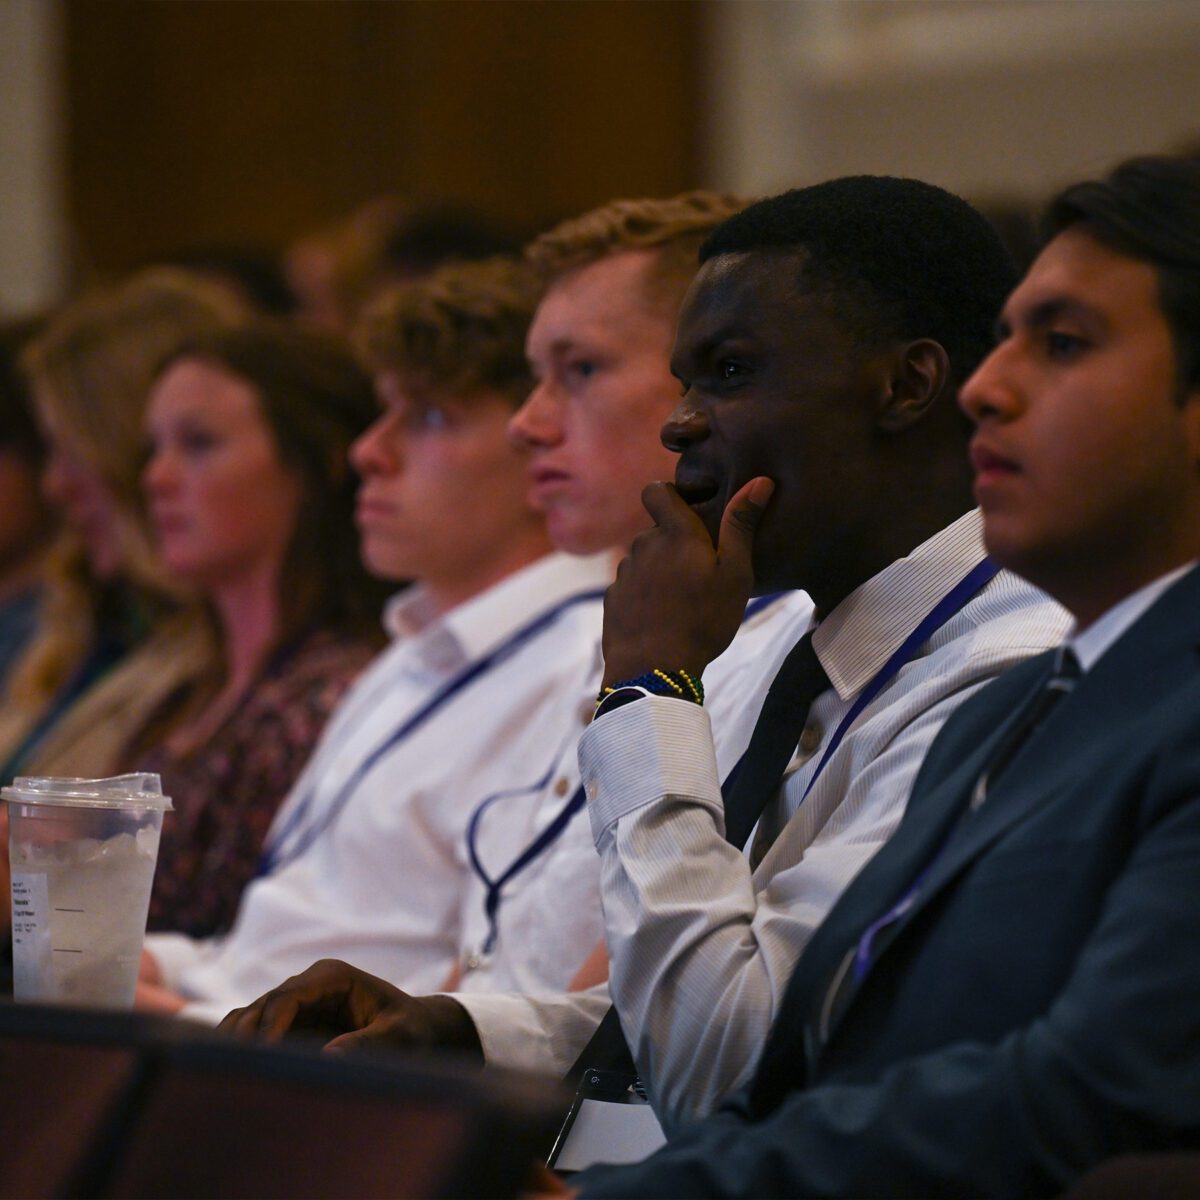 Students listen attentively during the Creatur Conference